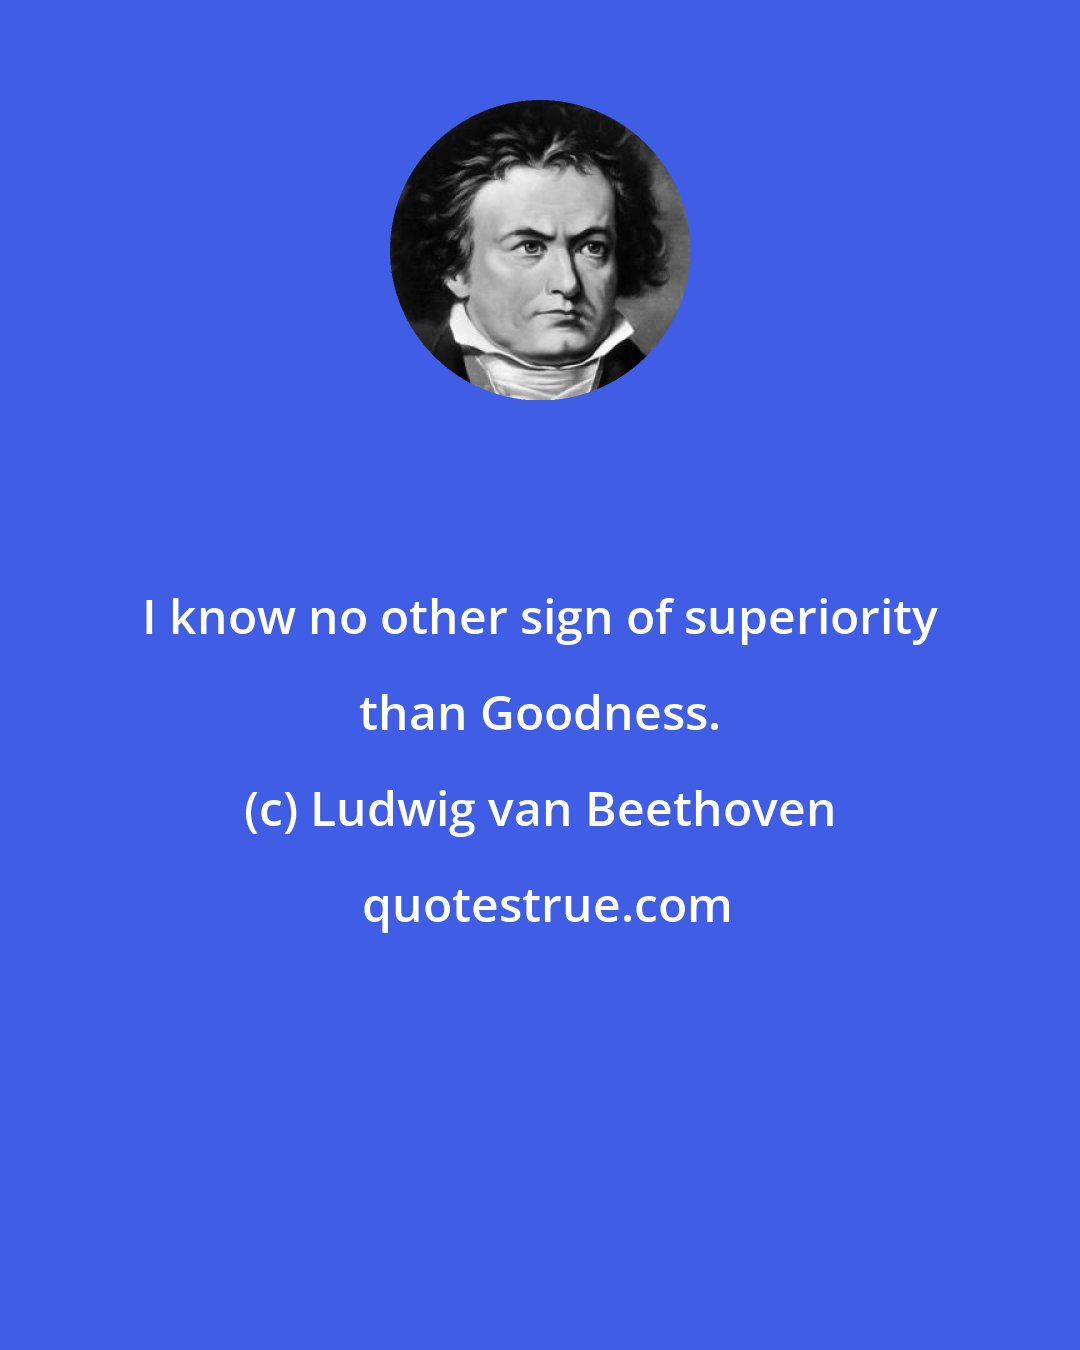 Ludwig van Beethoven: I know no other sign of superiority than Goodness.